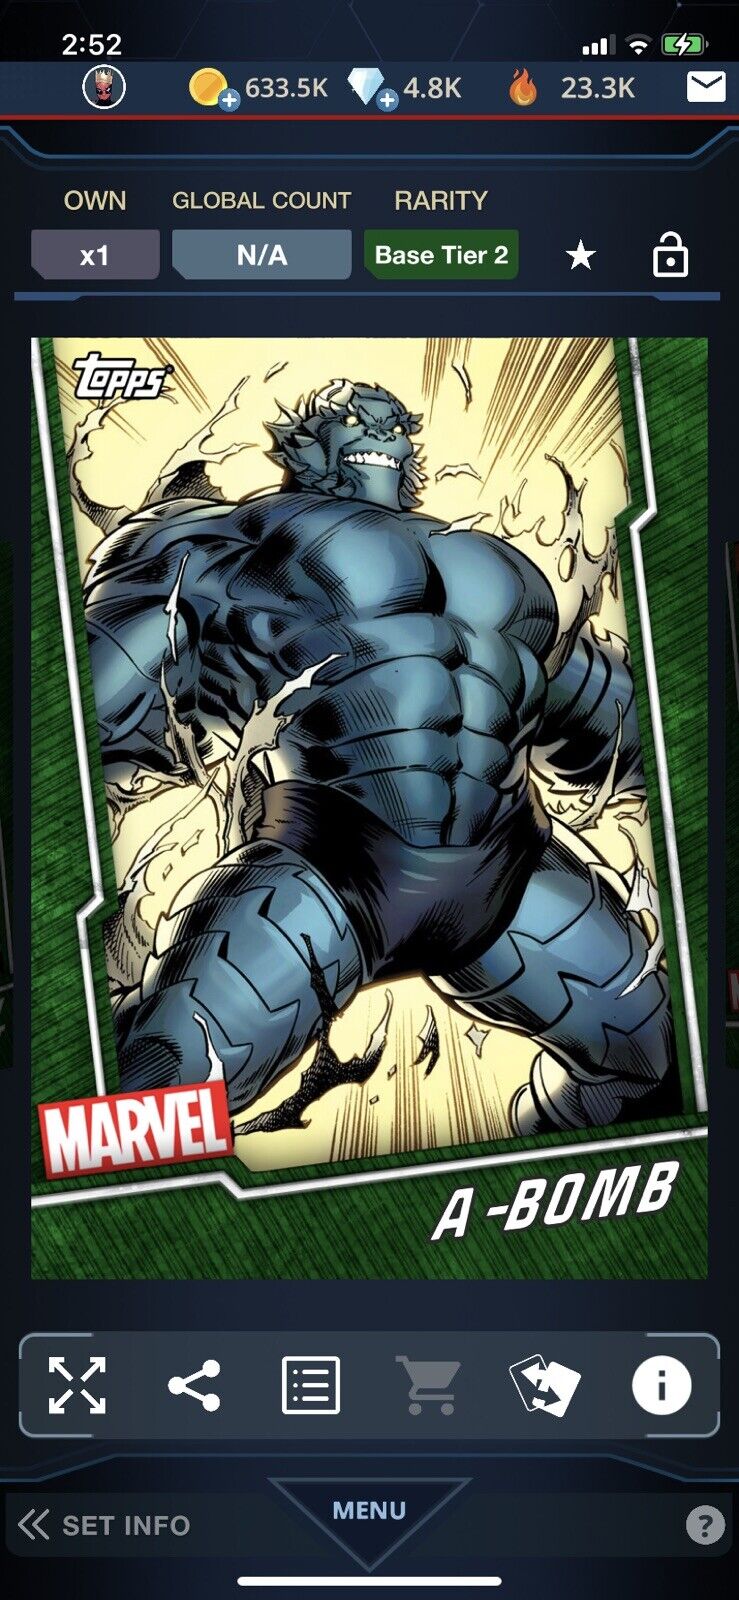 Topps Marvel Collect Digital Tier 2 Green 2019 A-Bomb Base Card